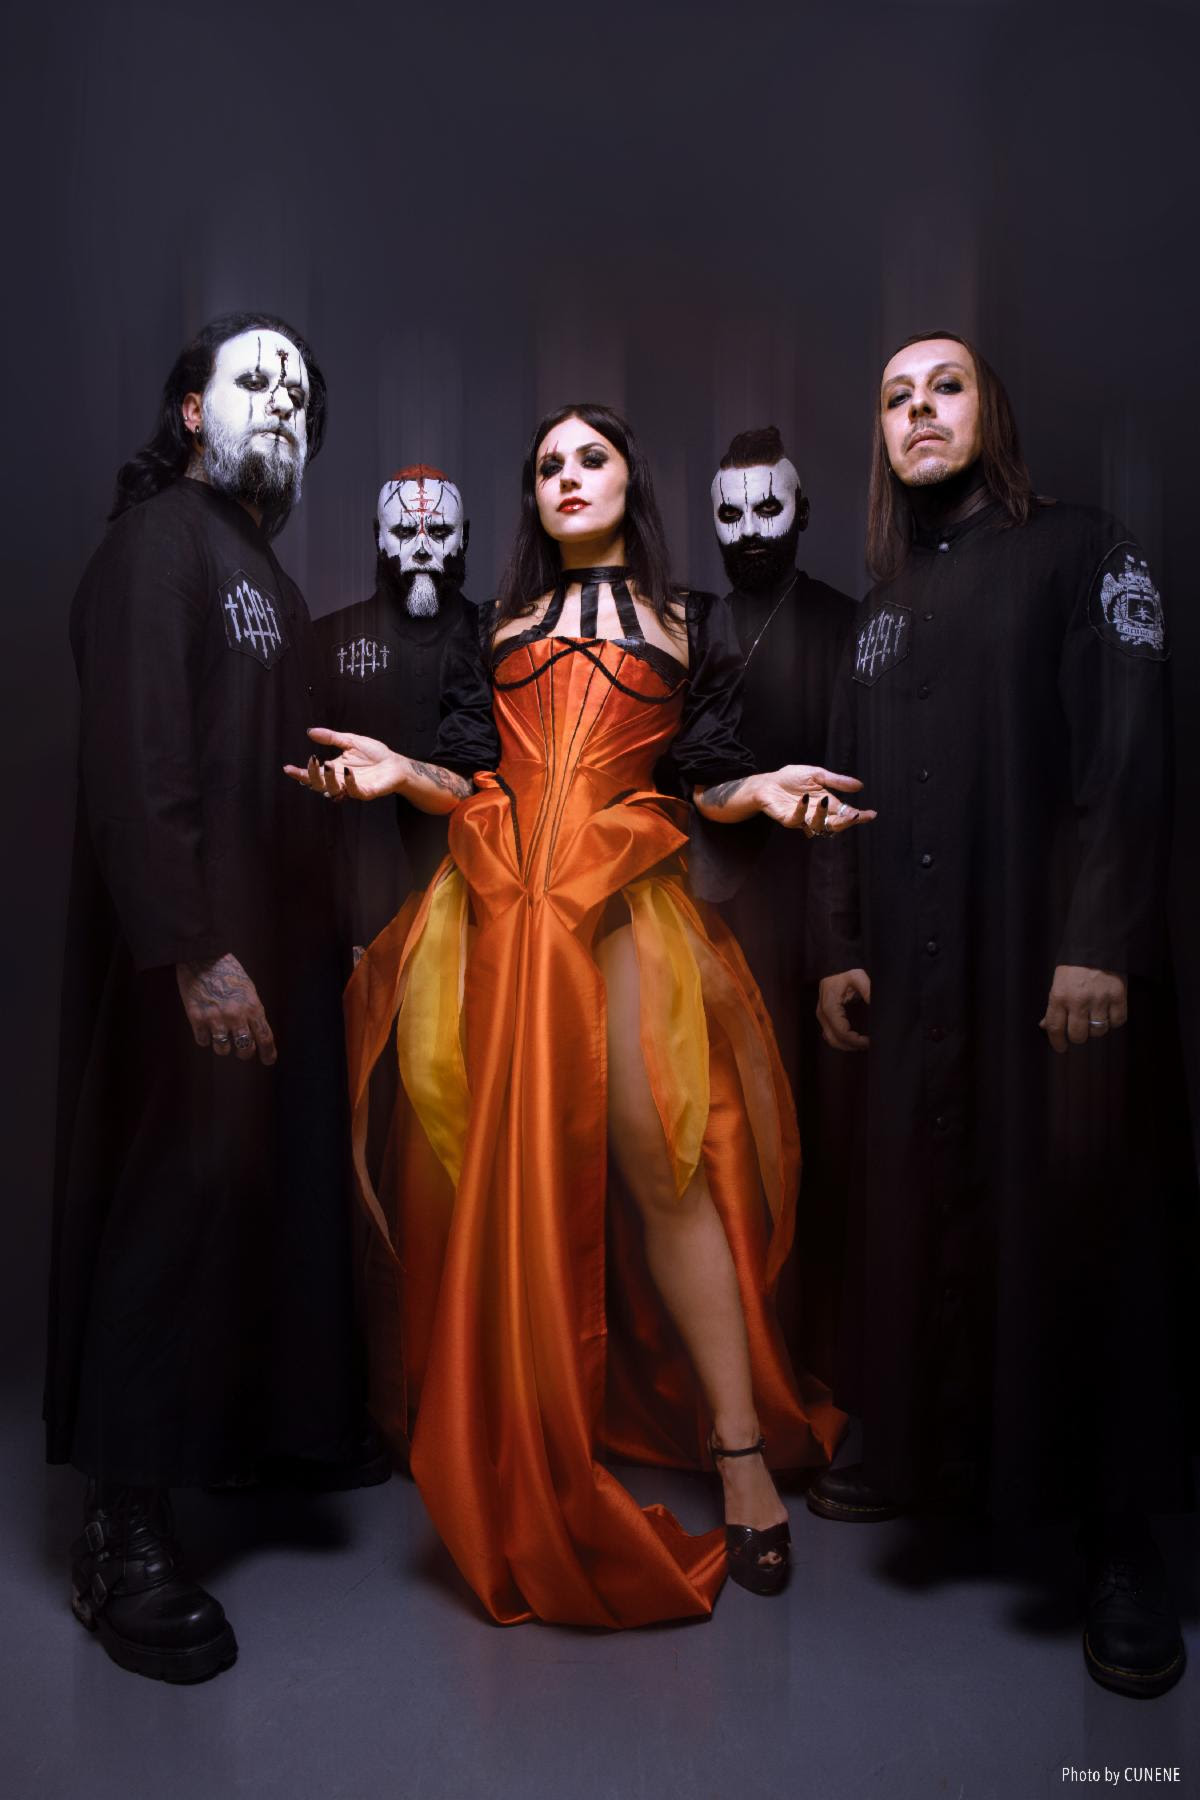 LACUNA COIL Release Highly Anticipated Single "Never Dawn"